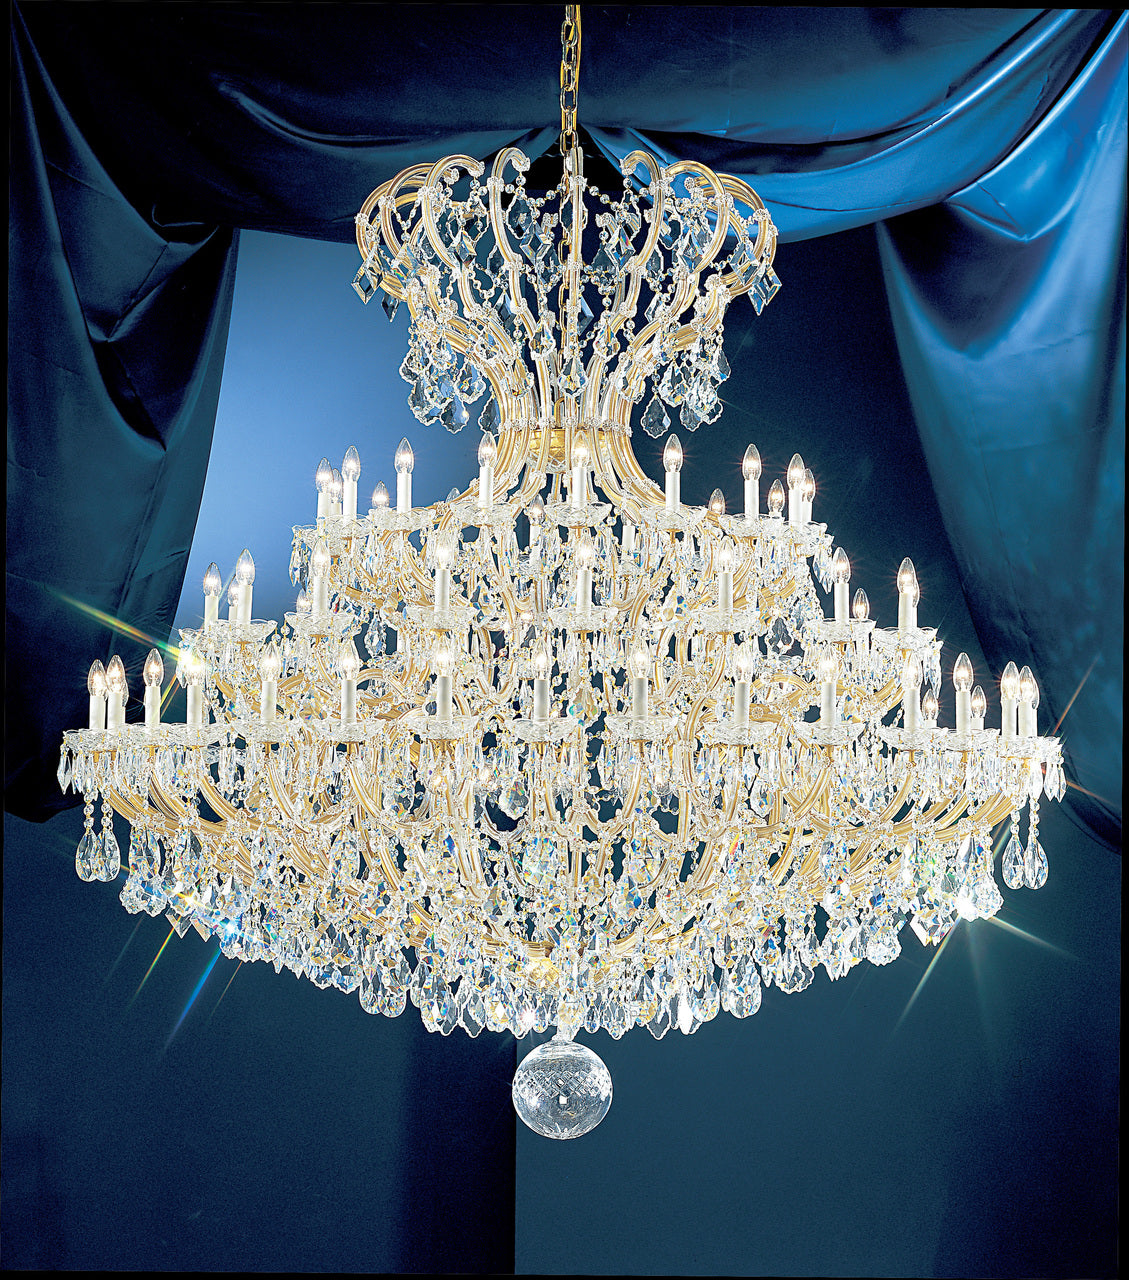 Classic Lighting 8149 OWG SC Maria Theresa Traditional Crystal Chandelier in Olde World Gold (Imported from Italy)